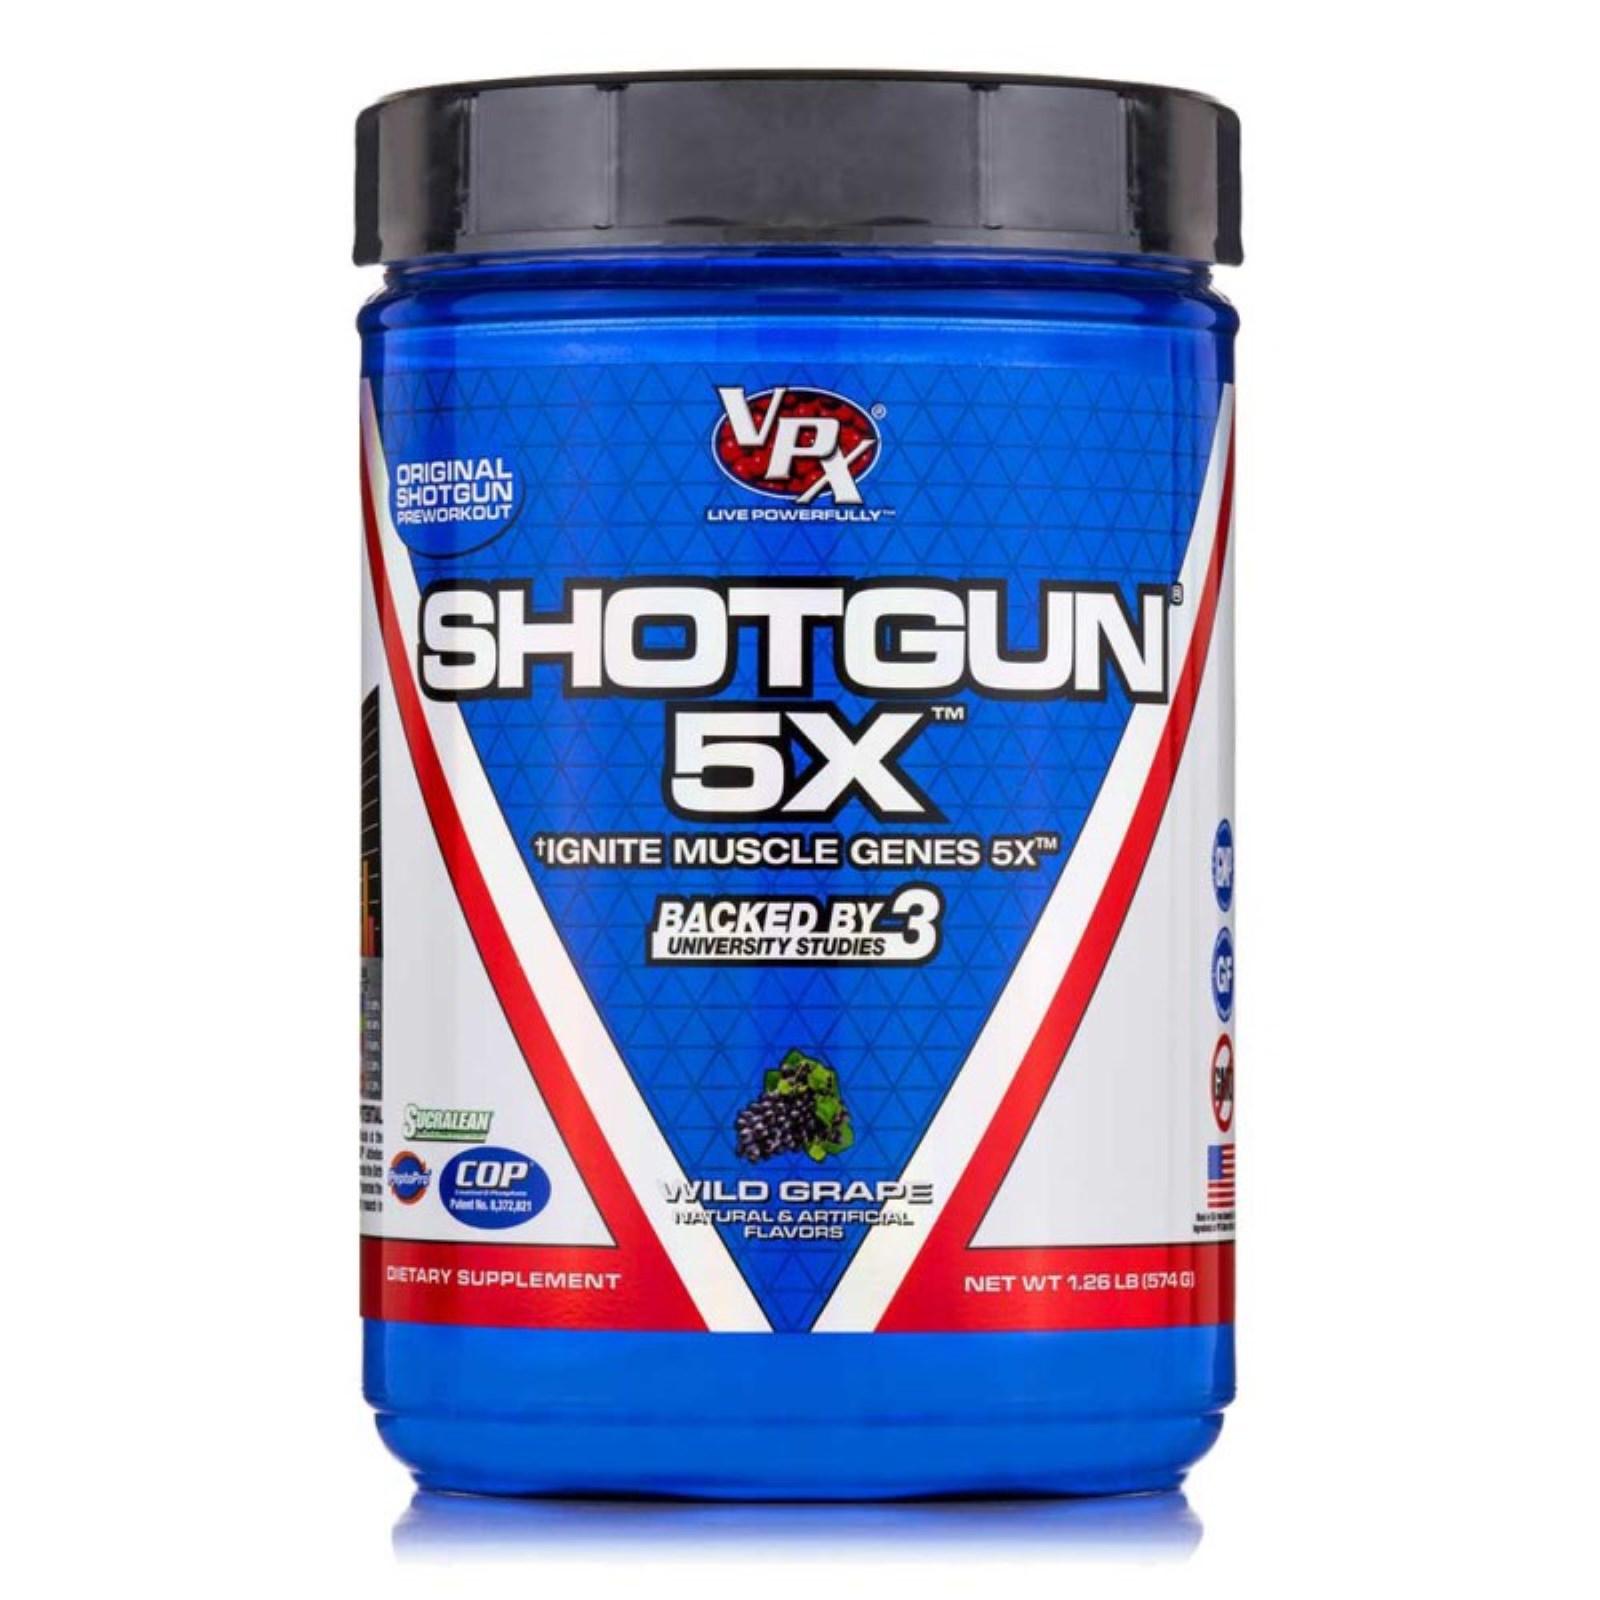 6 Day Vpx pre workout supplement for Beginner